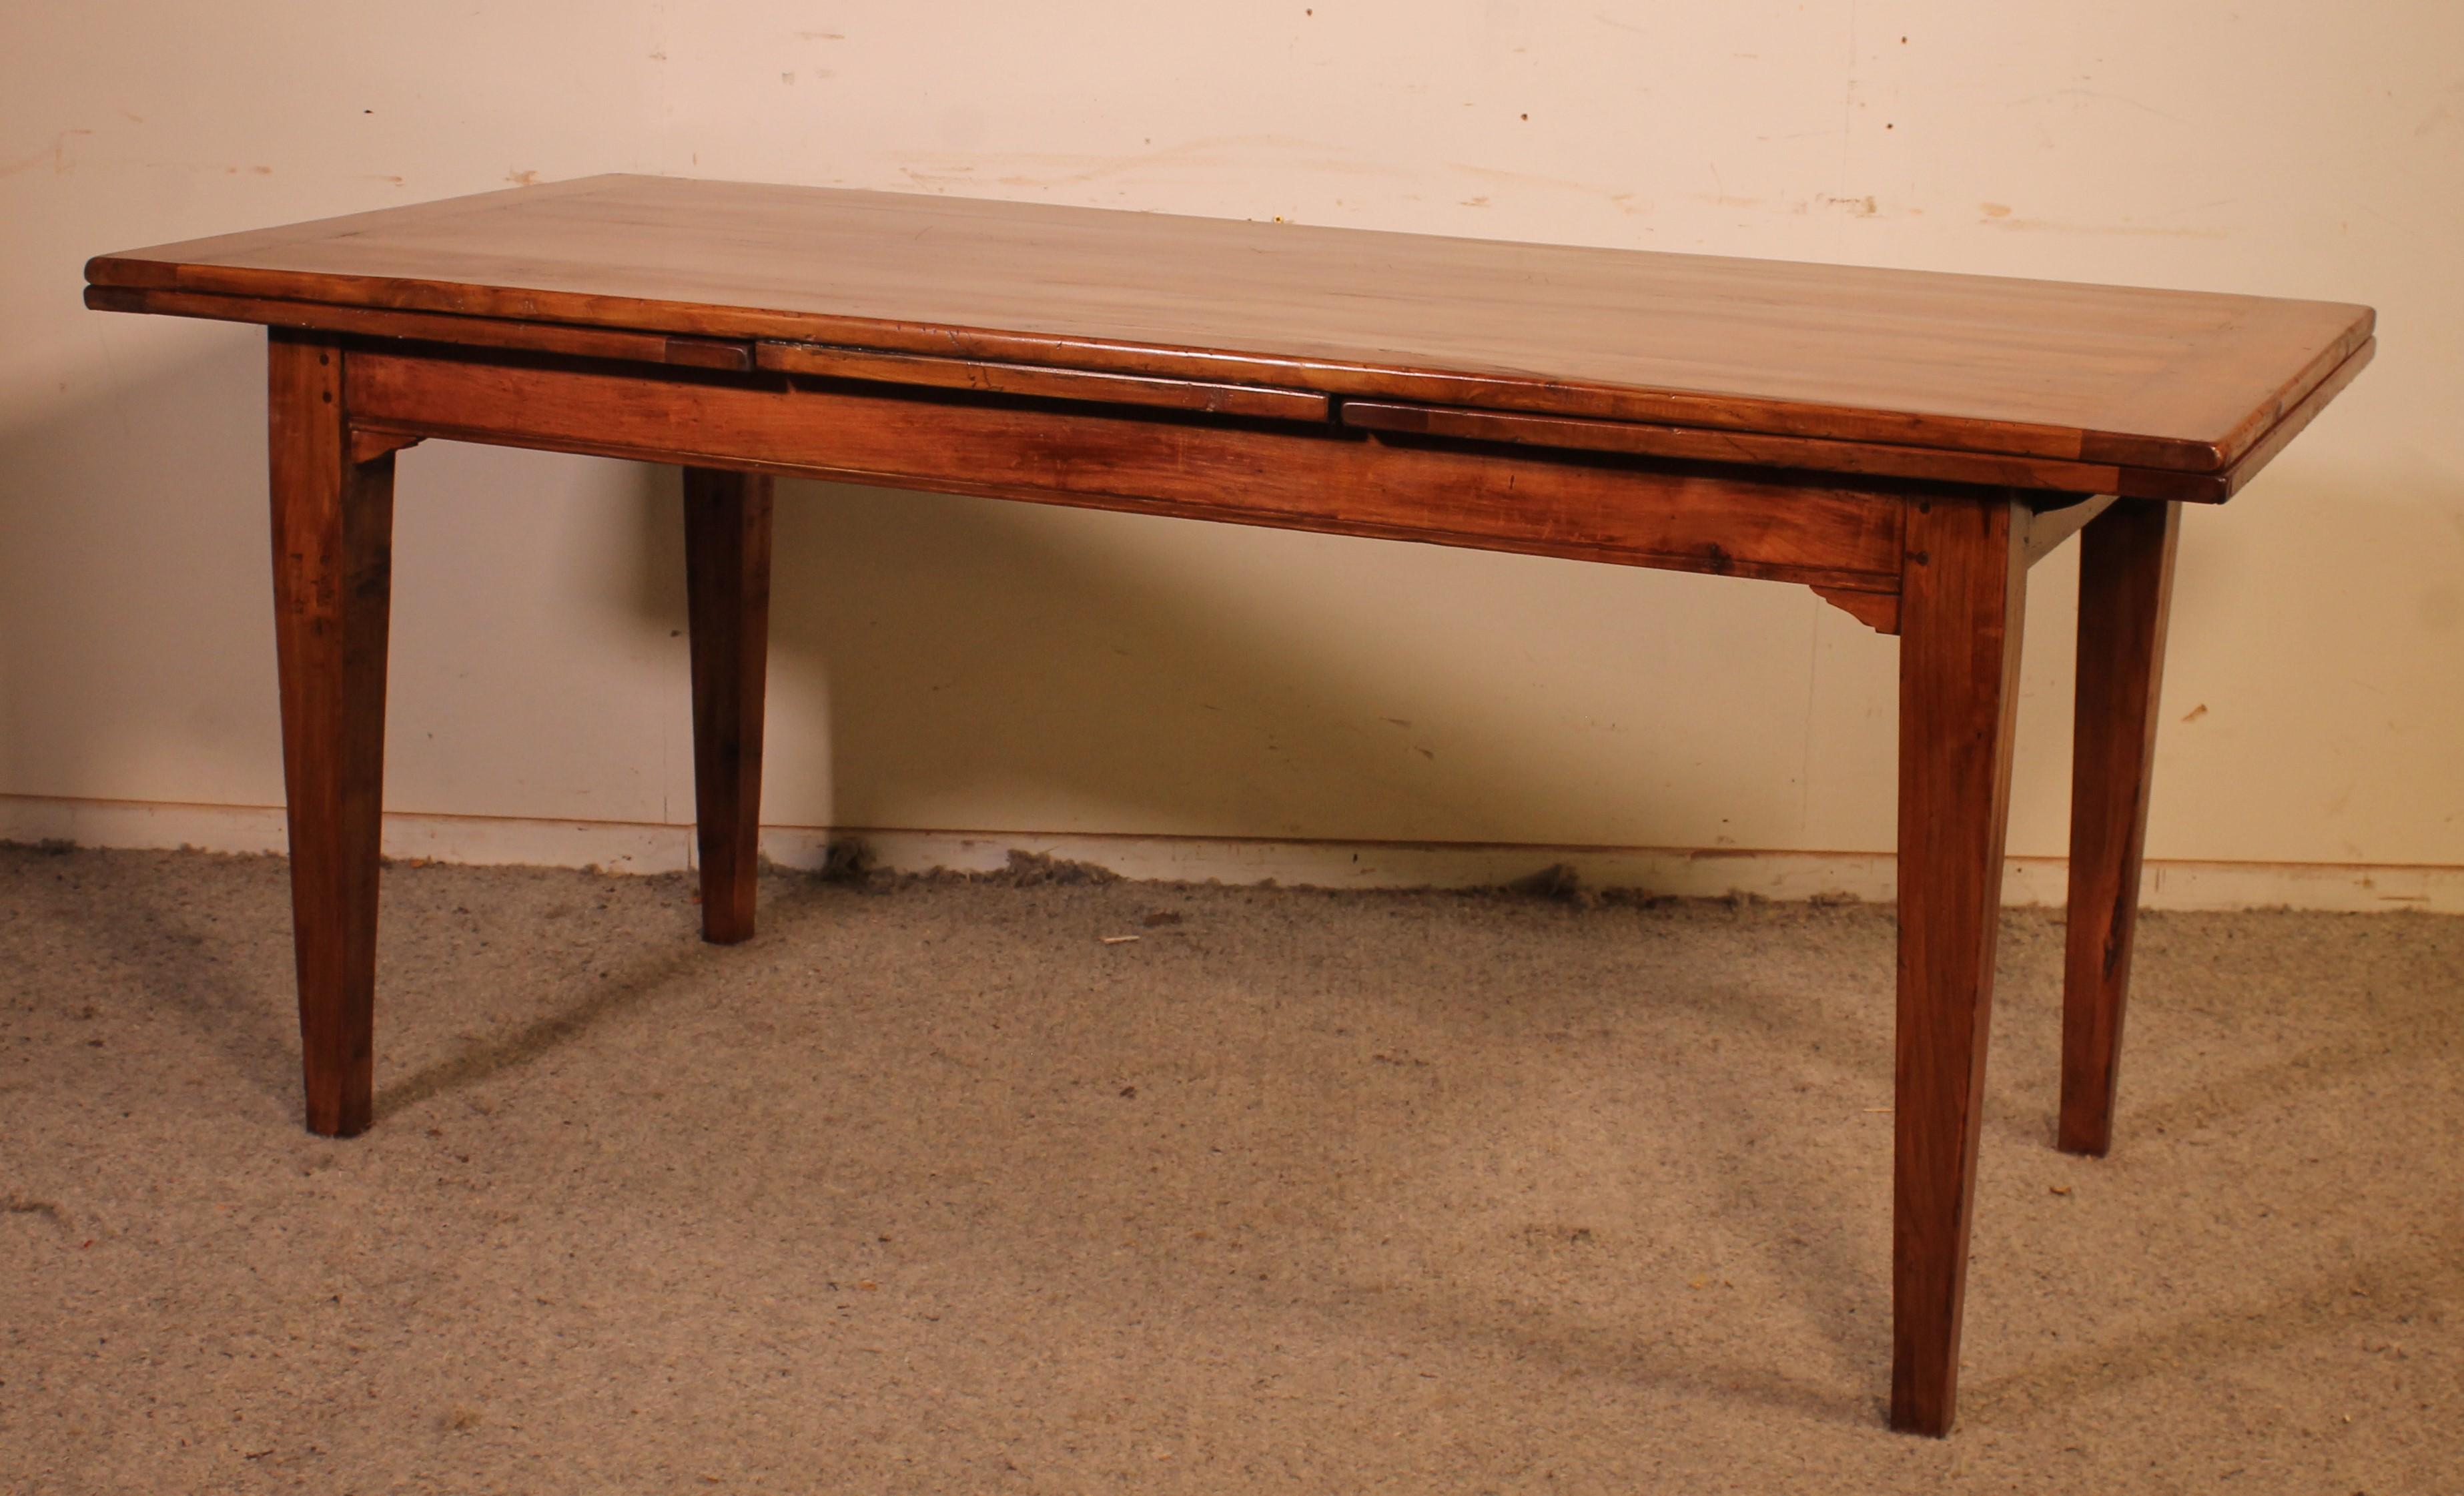 Small Extendable Table in Cherry Wood from the 19th Century For Sale 4